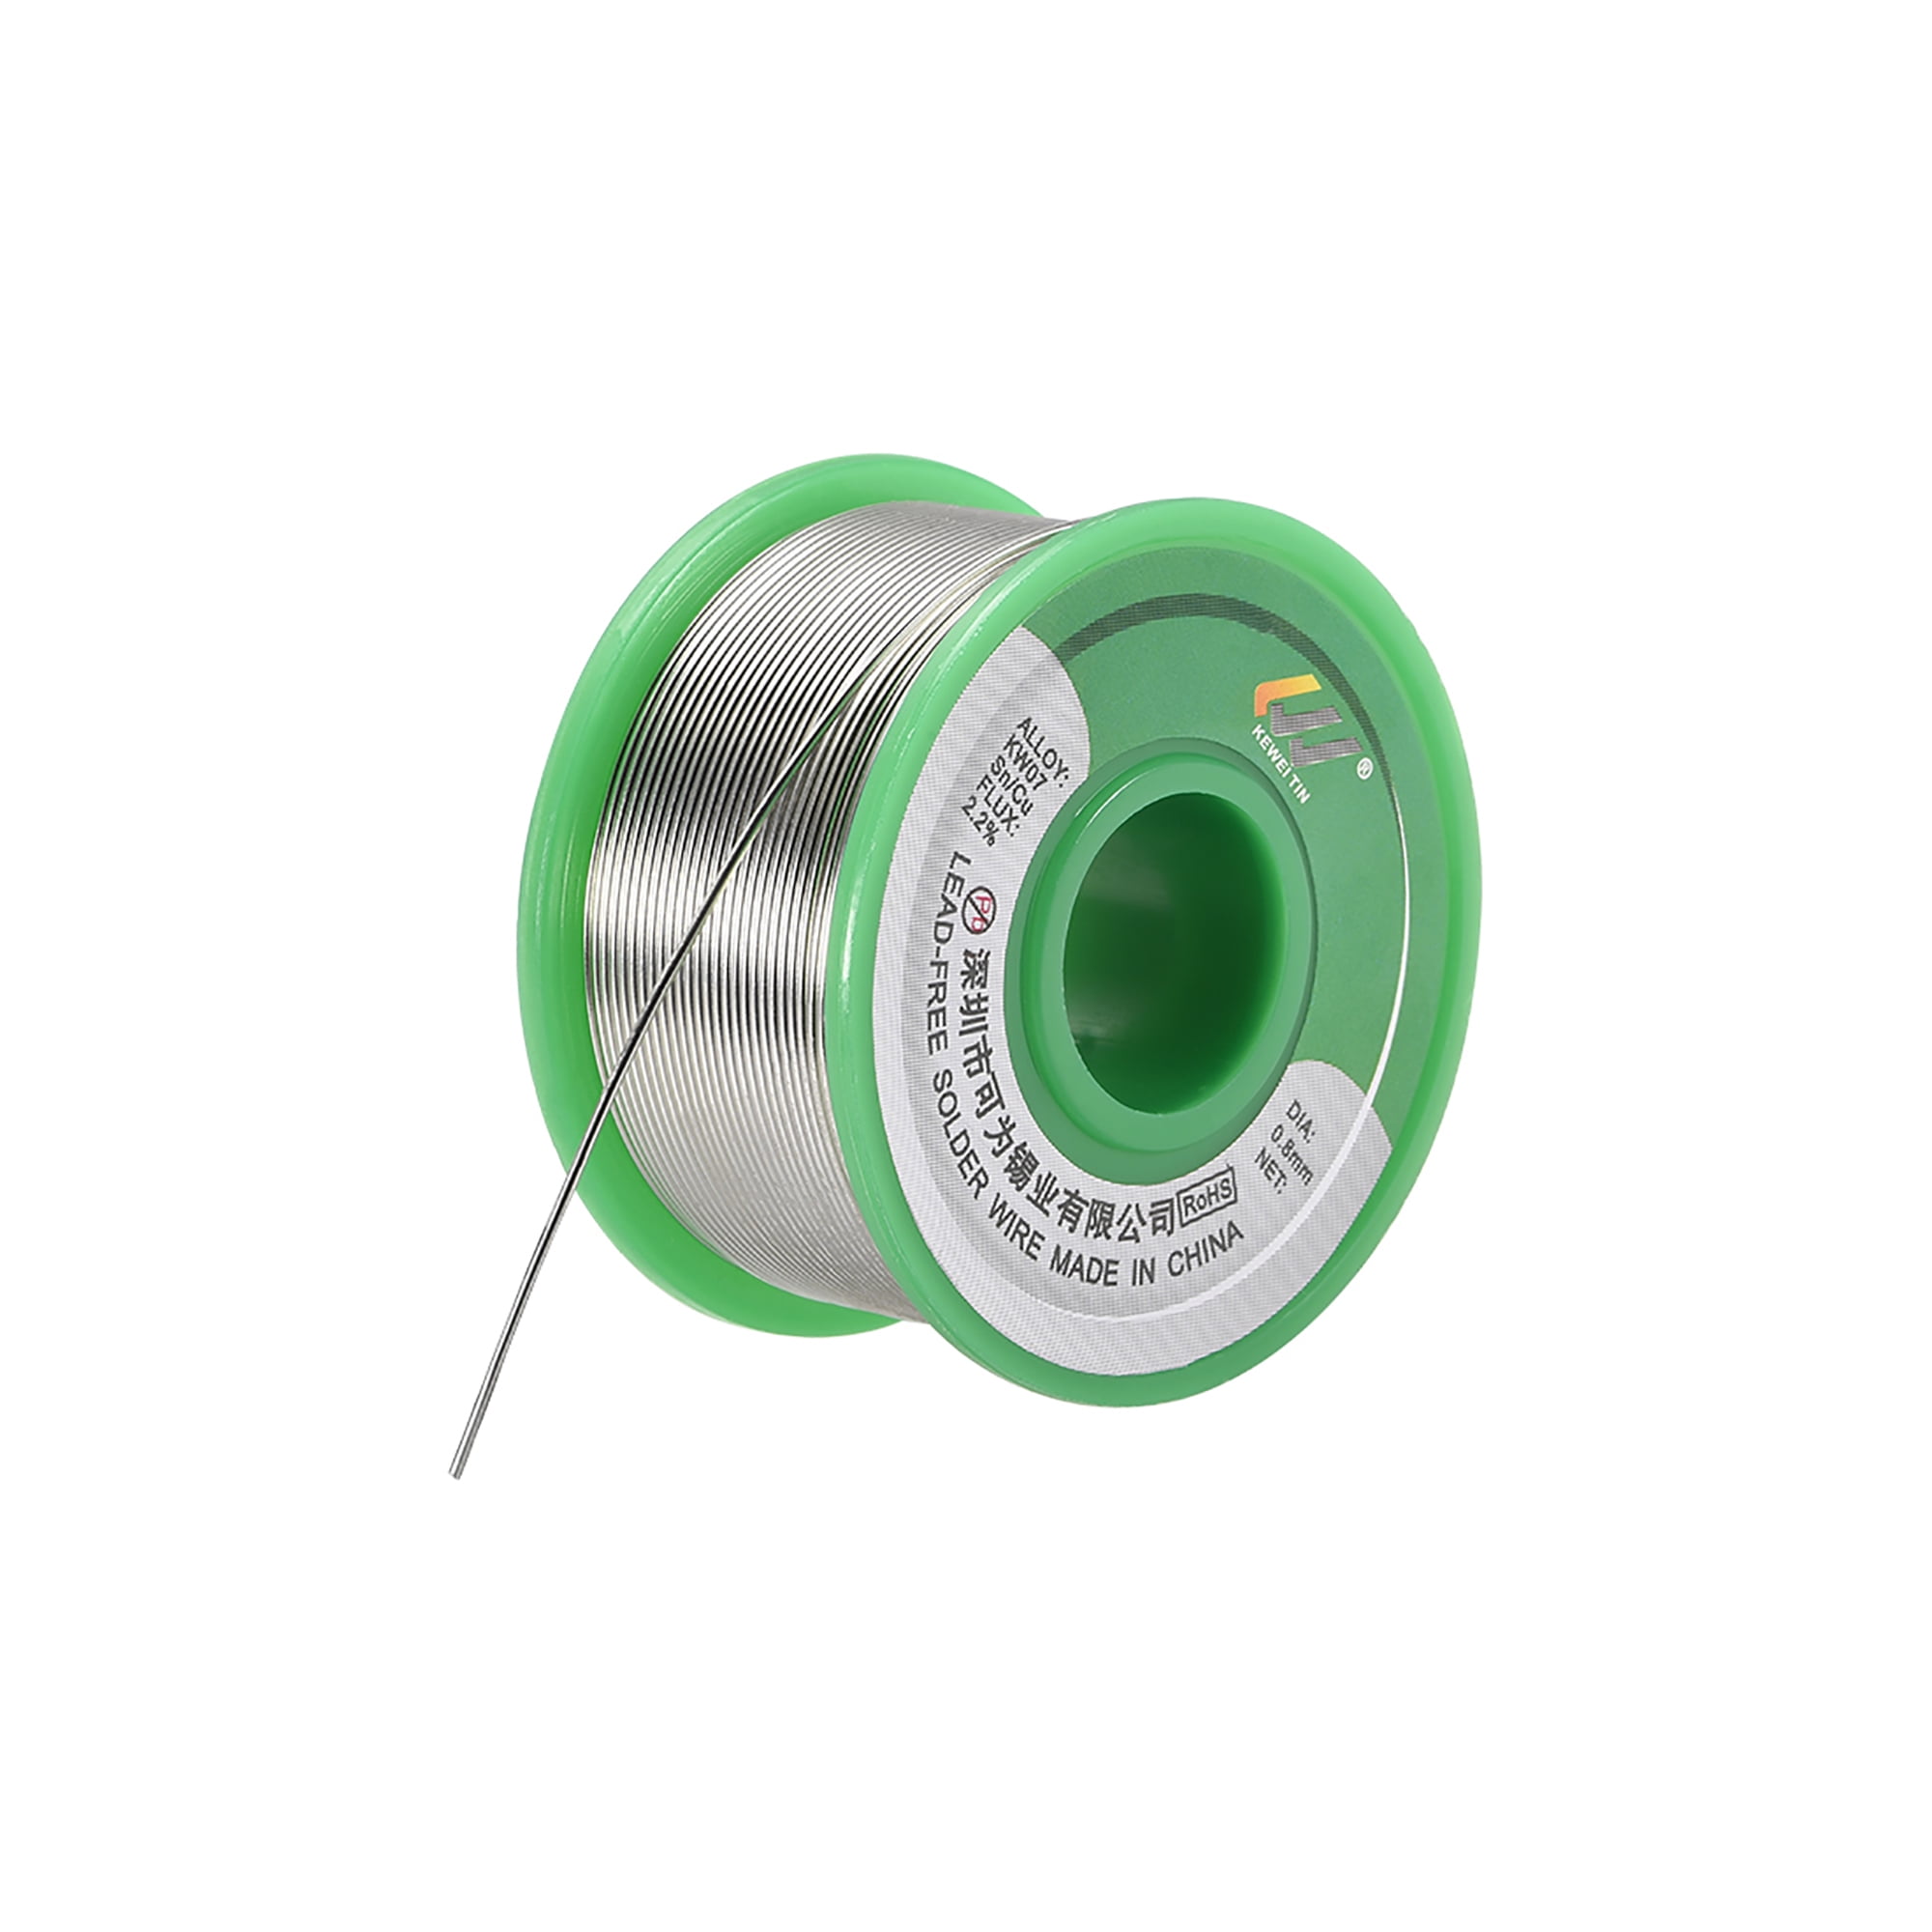 Lead Free Solder Wire Sn99.3 Cu0.7 Rosin Core for Electronic Soldering 100g LL